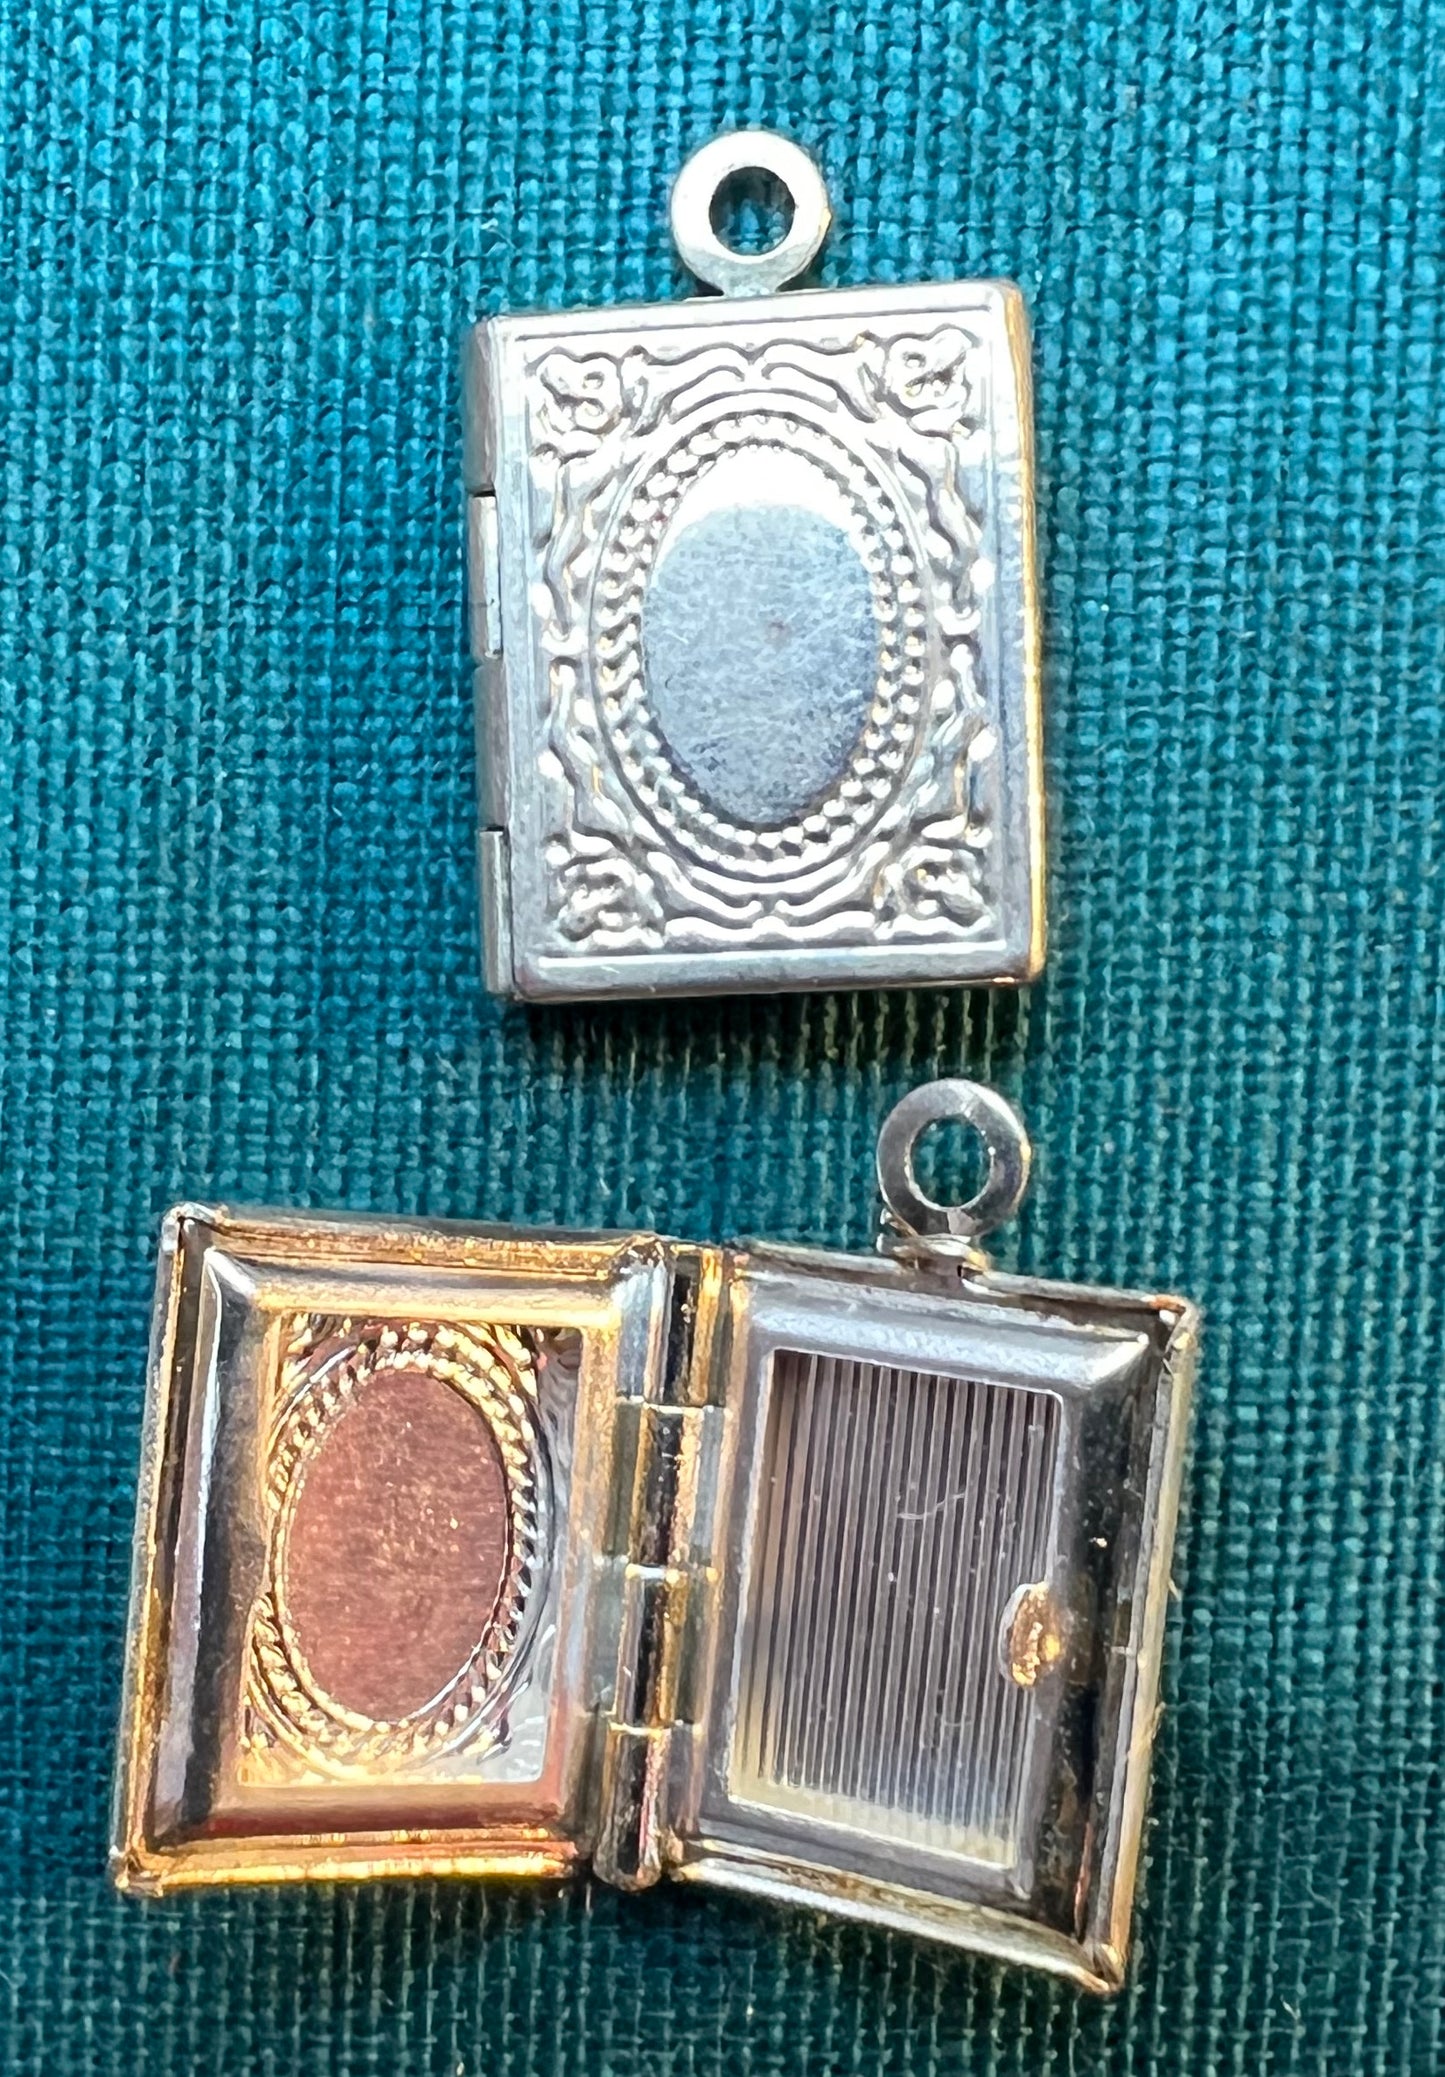 Tiny Book Shaped 1.4cm Locket - Bronze or Silver Tone